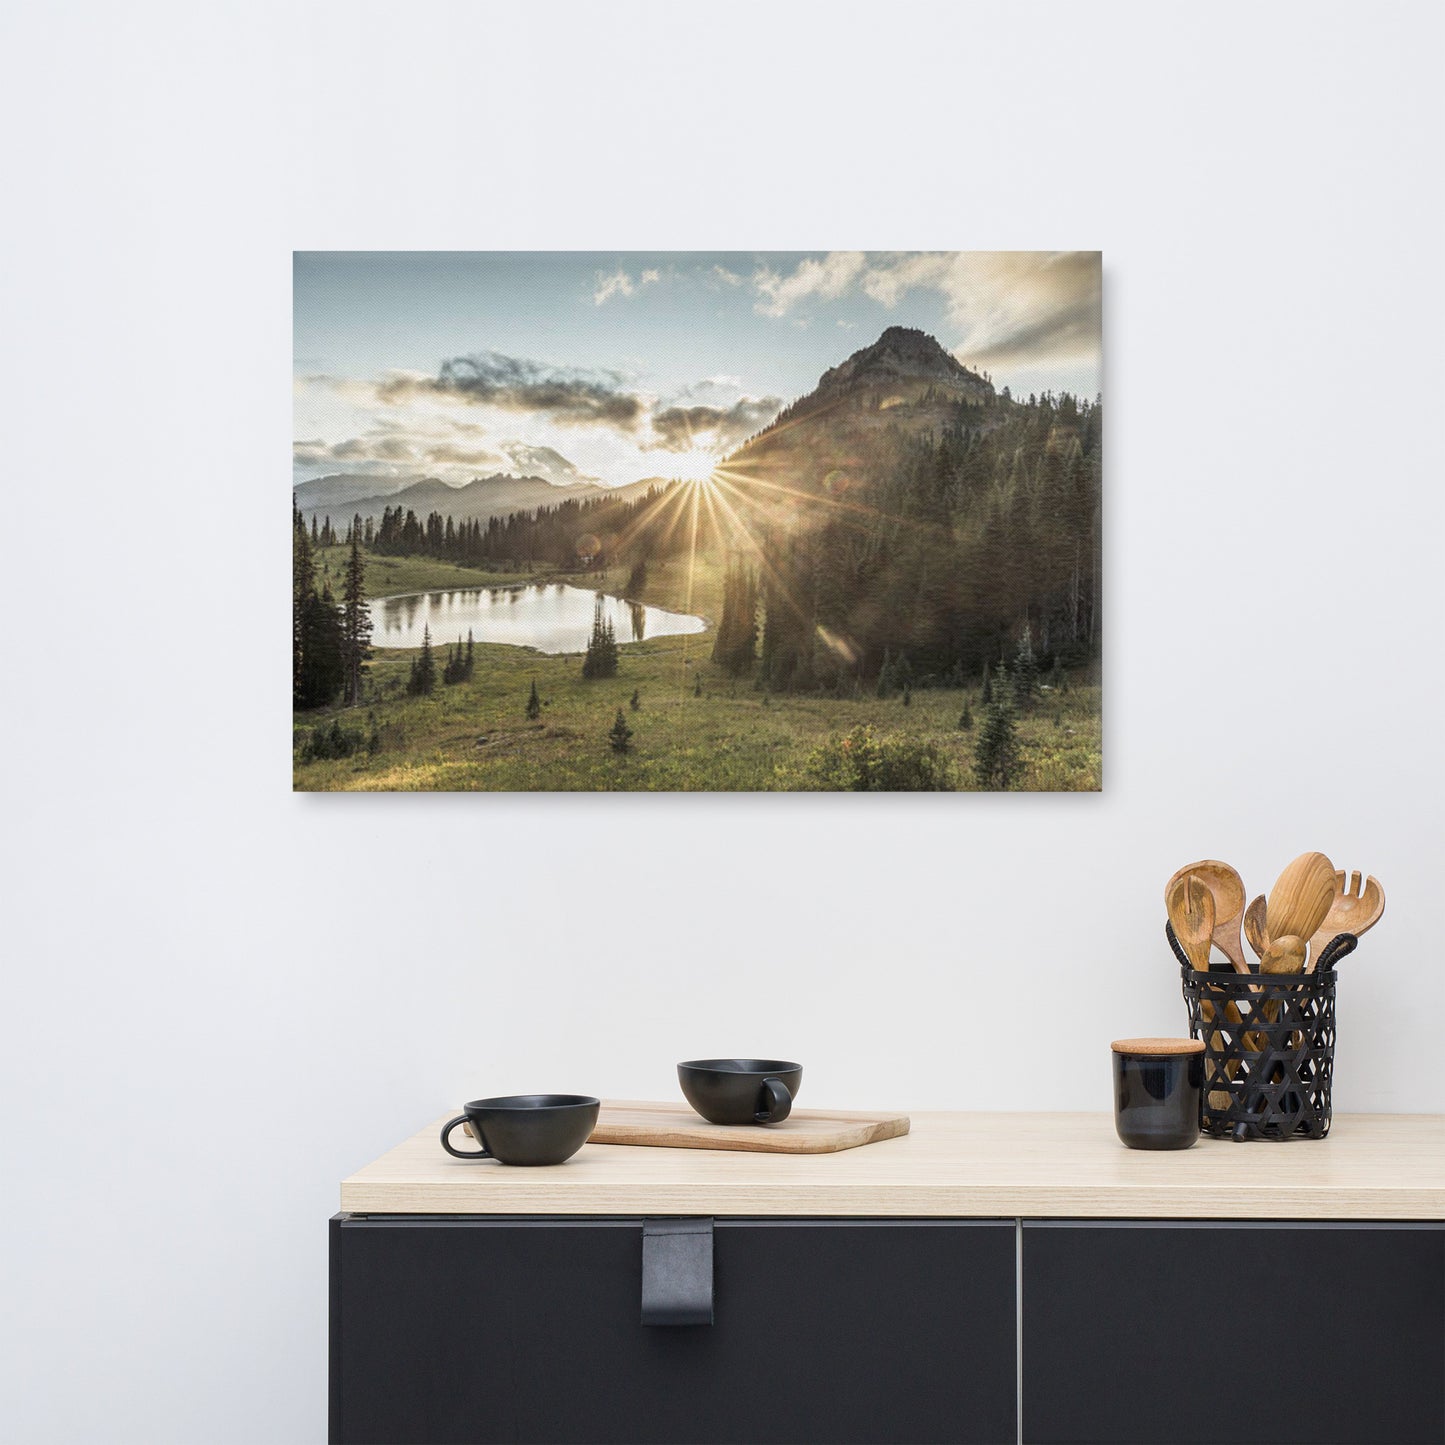 Canvas Wall Pictures For Bedroom: At Peace - Sunset Mountain and Lake Rural / Country / Farmhouse Style Nature / Landscape Photograph Wall Art Print